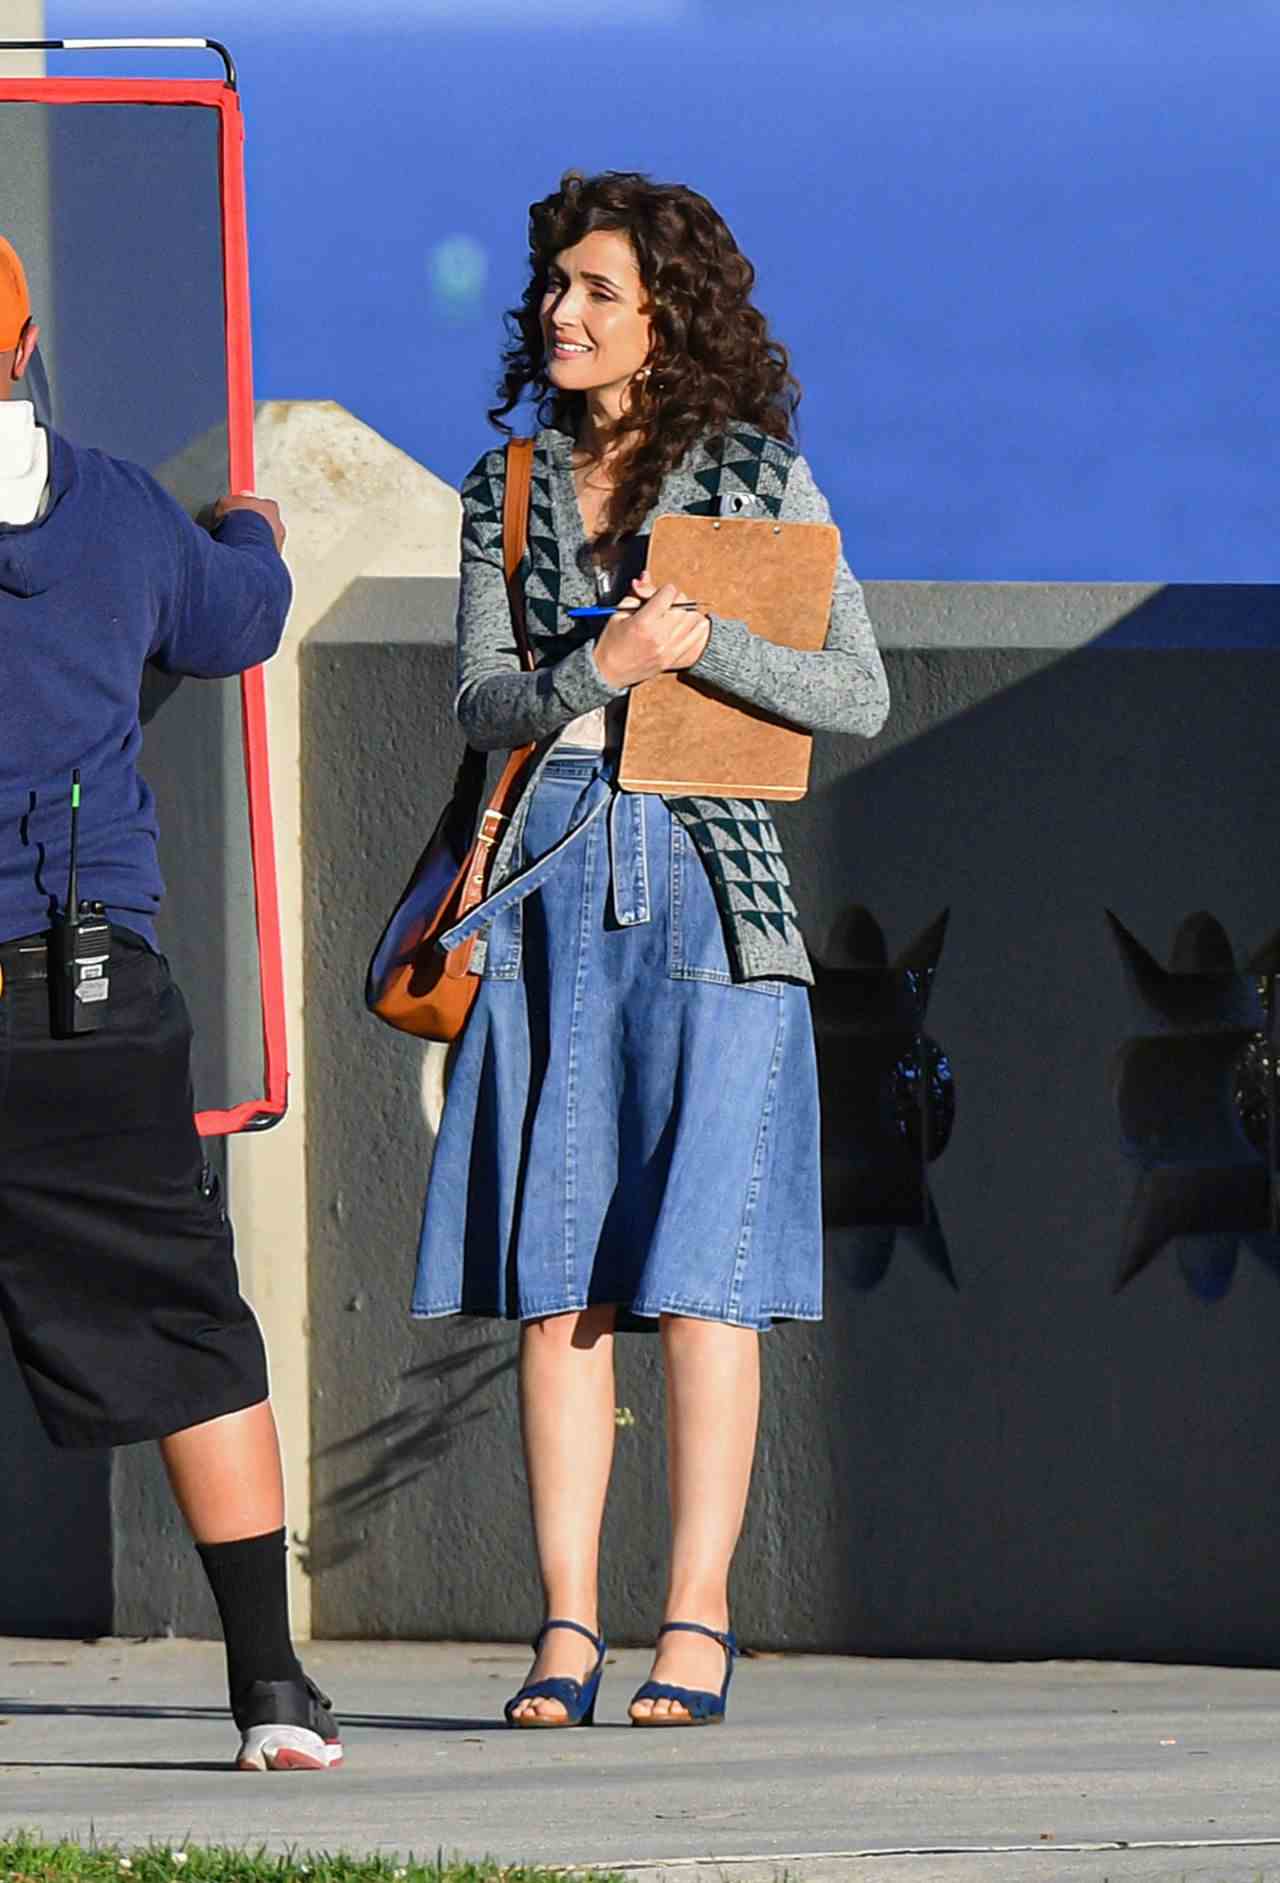 Rose Byrne in a Retro Denim Outfit at the set of Physical